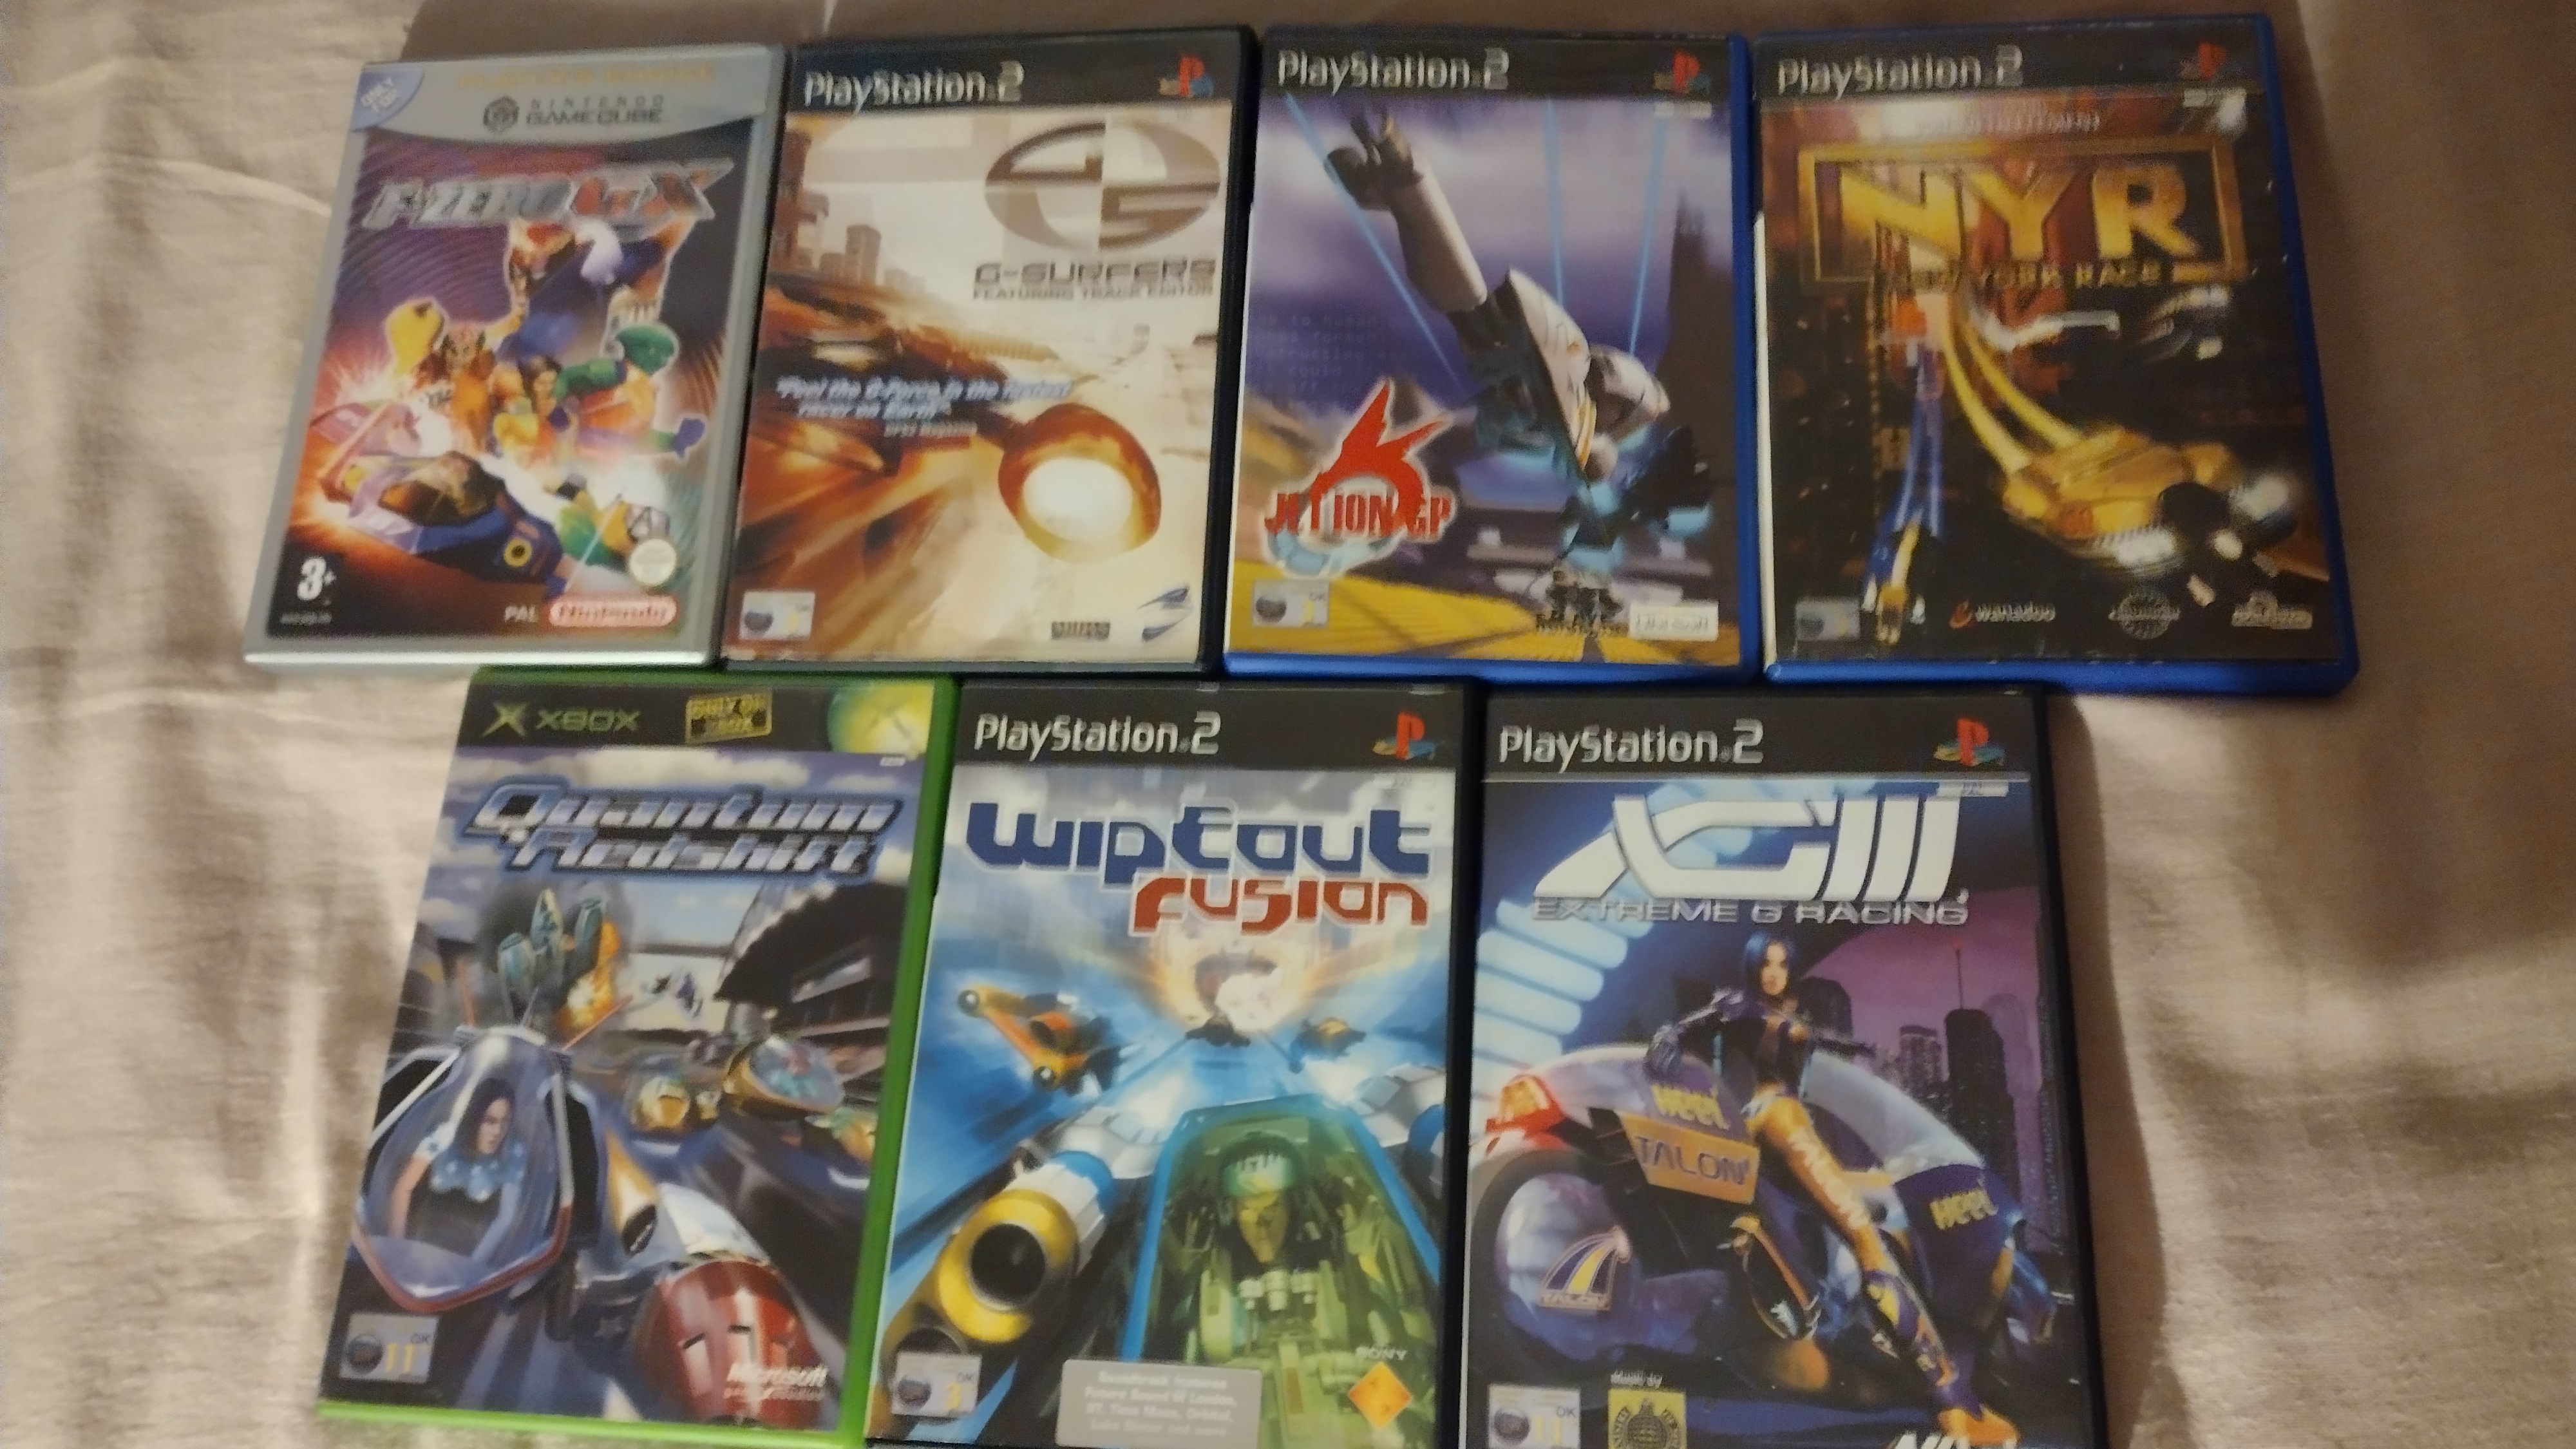 Keep cases for F-Zero GX, G-Surfers, Jet Ion GP, New York Race, Quantum Redshift, Wipeout Fusion, and Extreme G 3 laid out on a bedsheet.